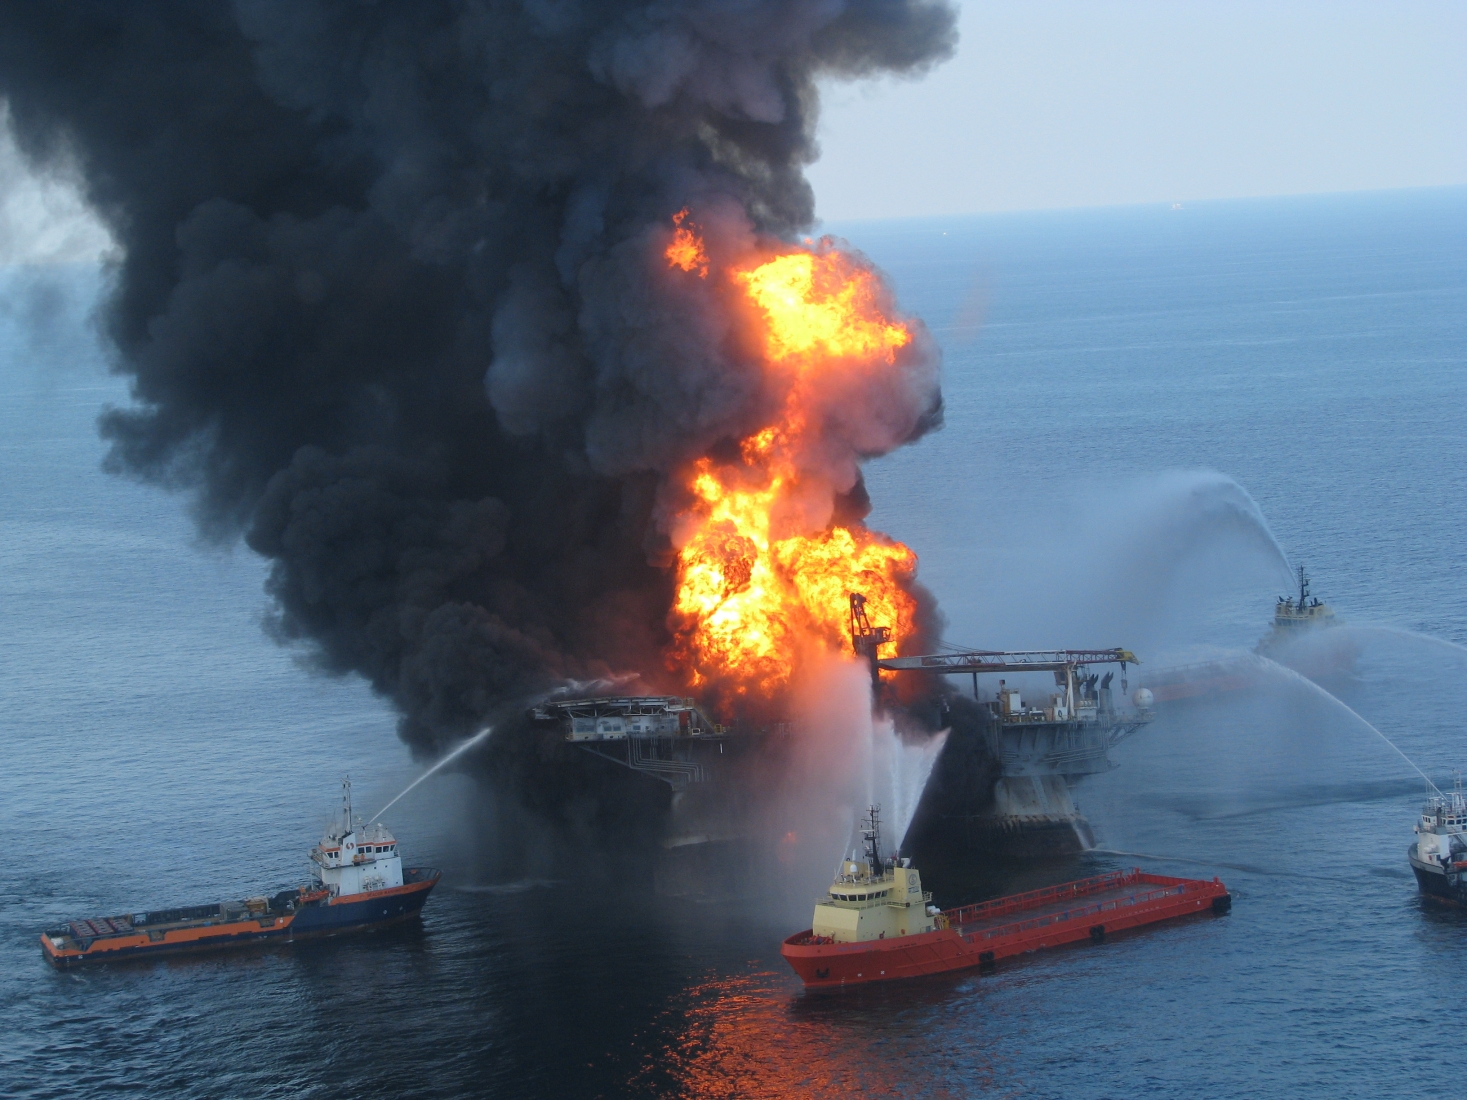 Several vessels pump pressurized water at a fire on an oil rig.